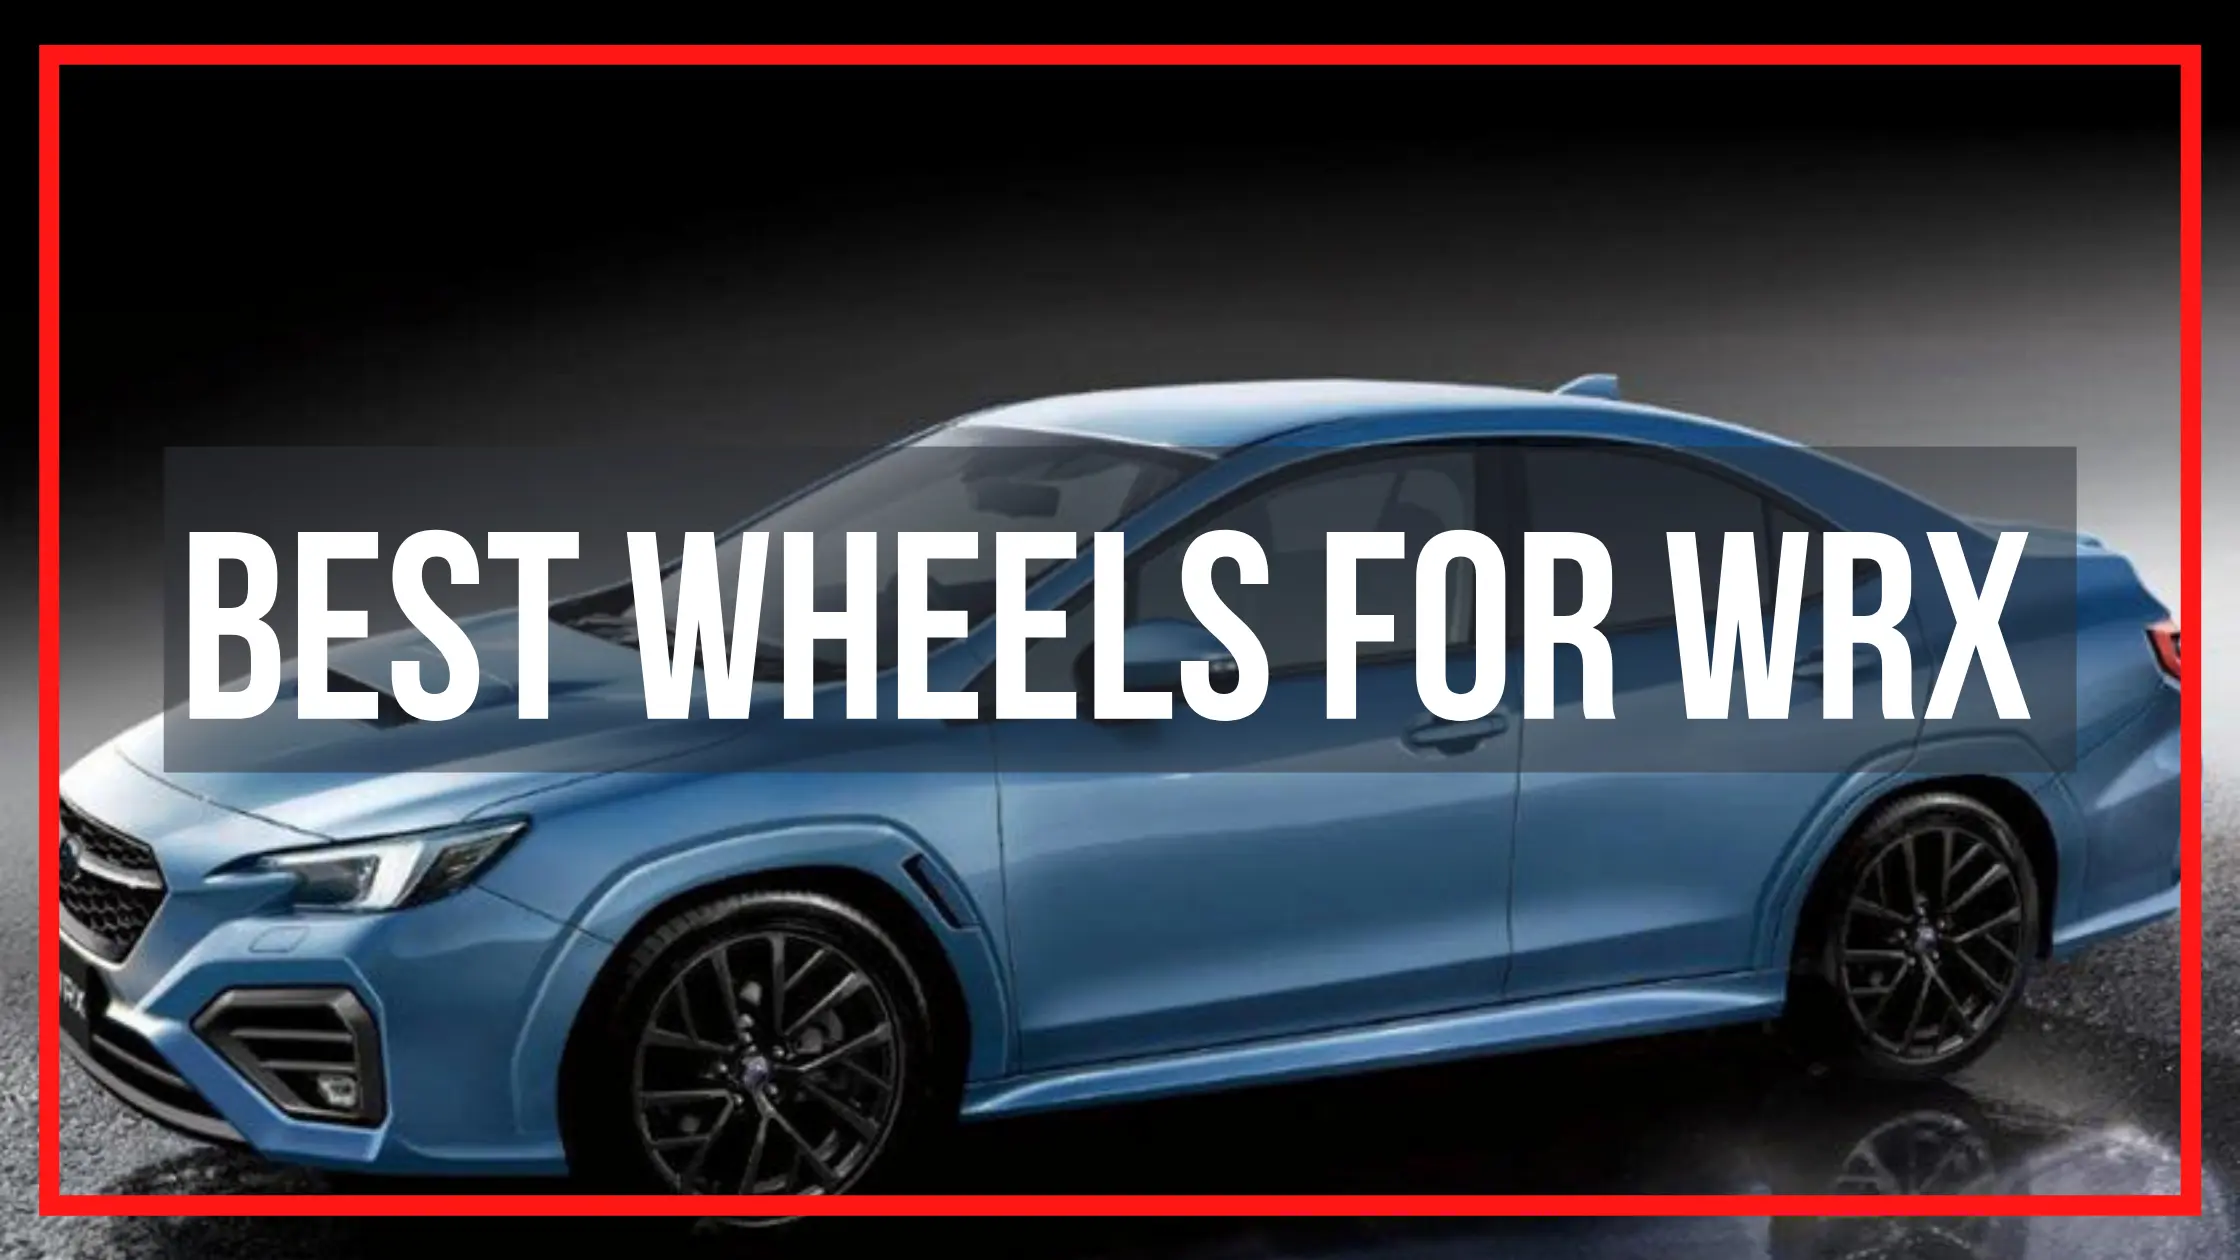 5 Best Wheels For Wrx To Give Your Car Ultimat Look In 2022